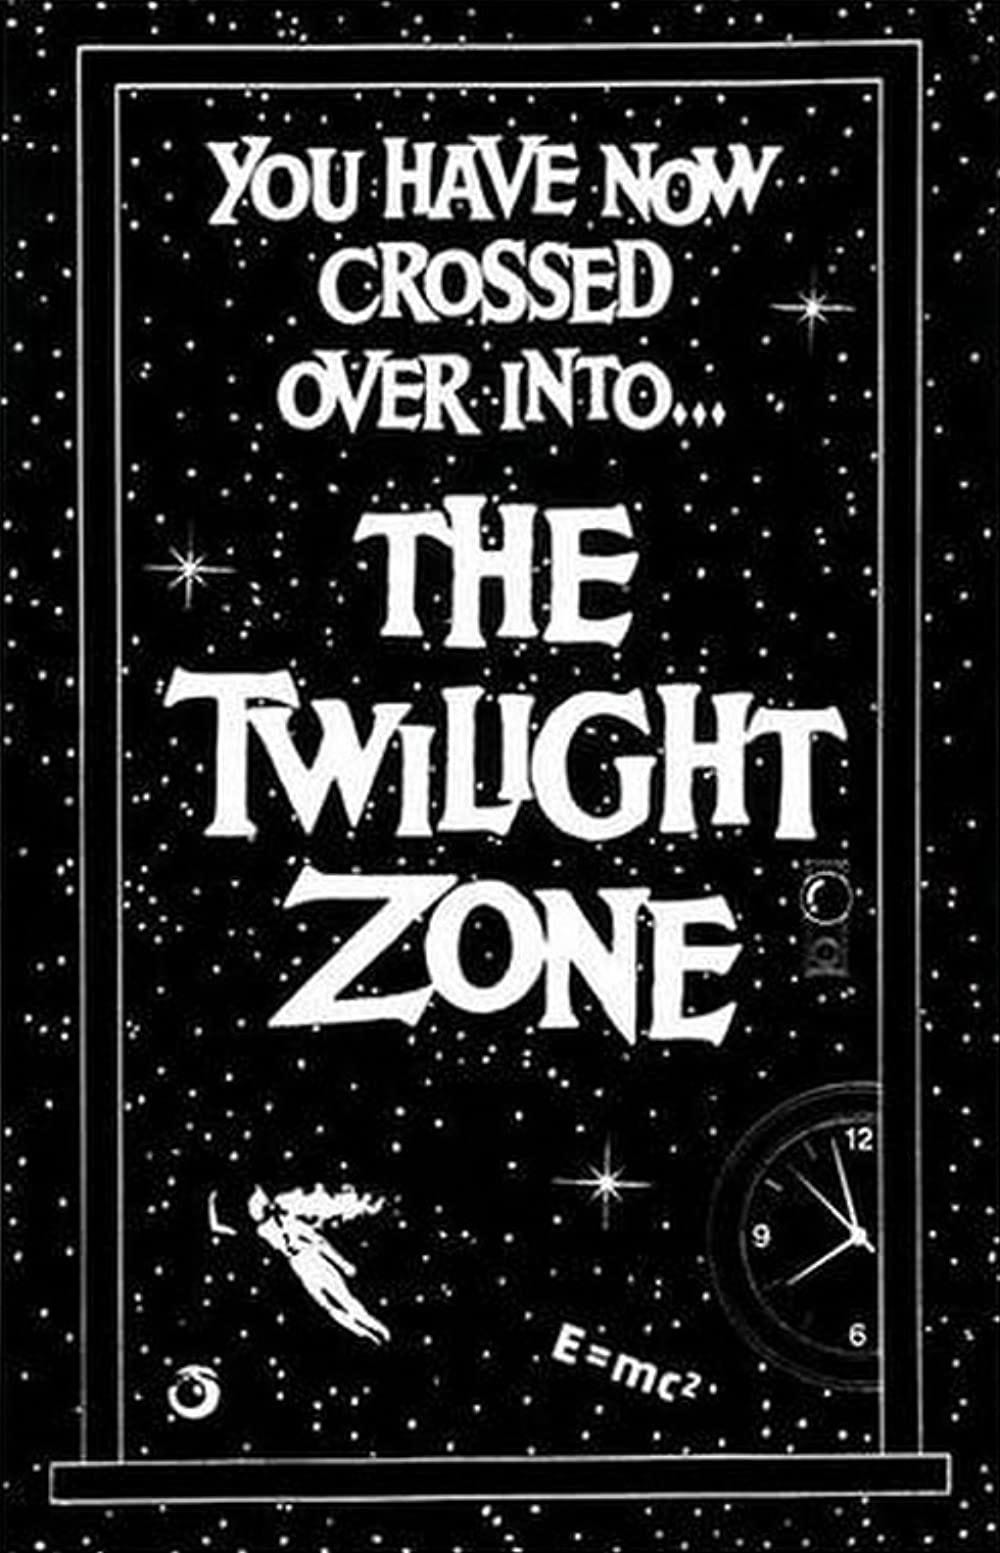 Inspired by Rod Serling and The Twilight Zone…, by Andrew Fumento